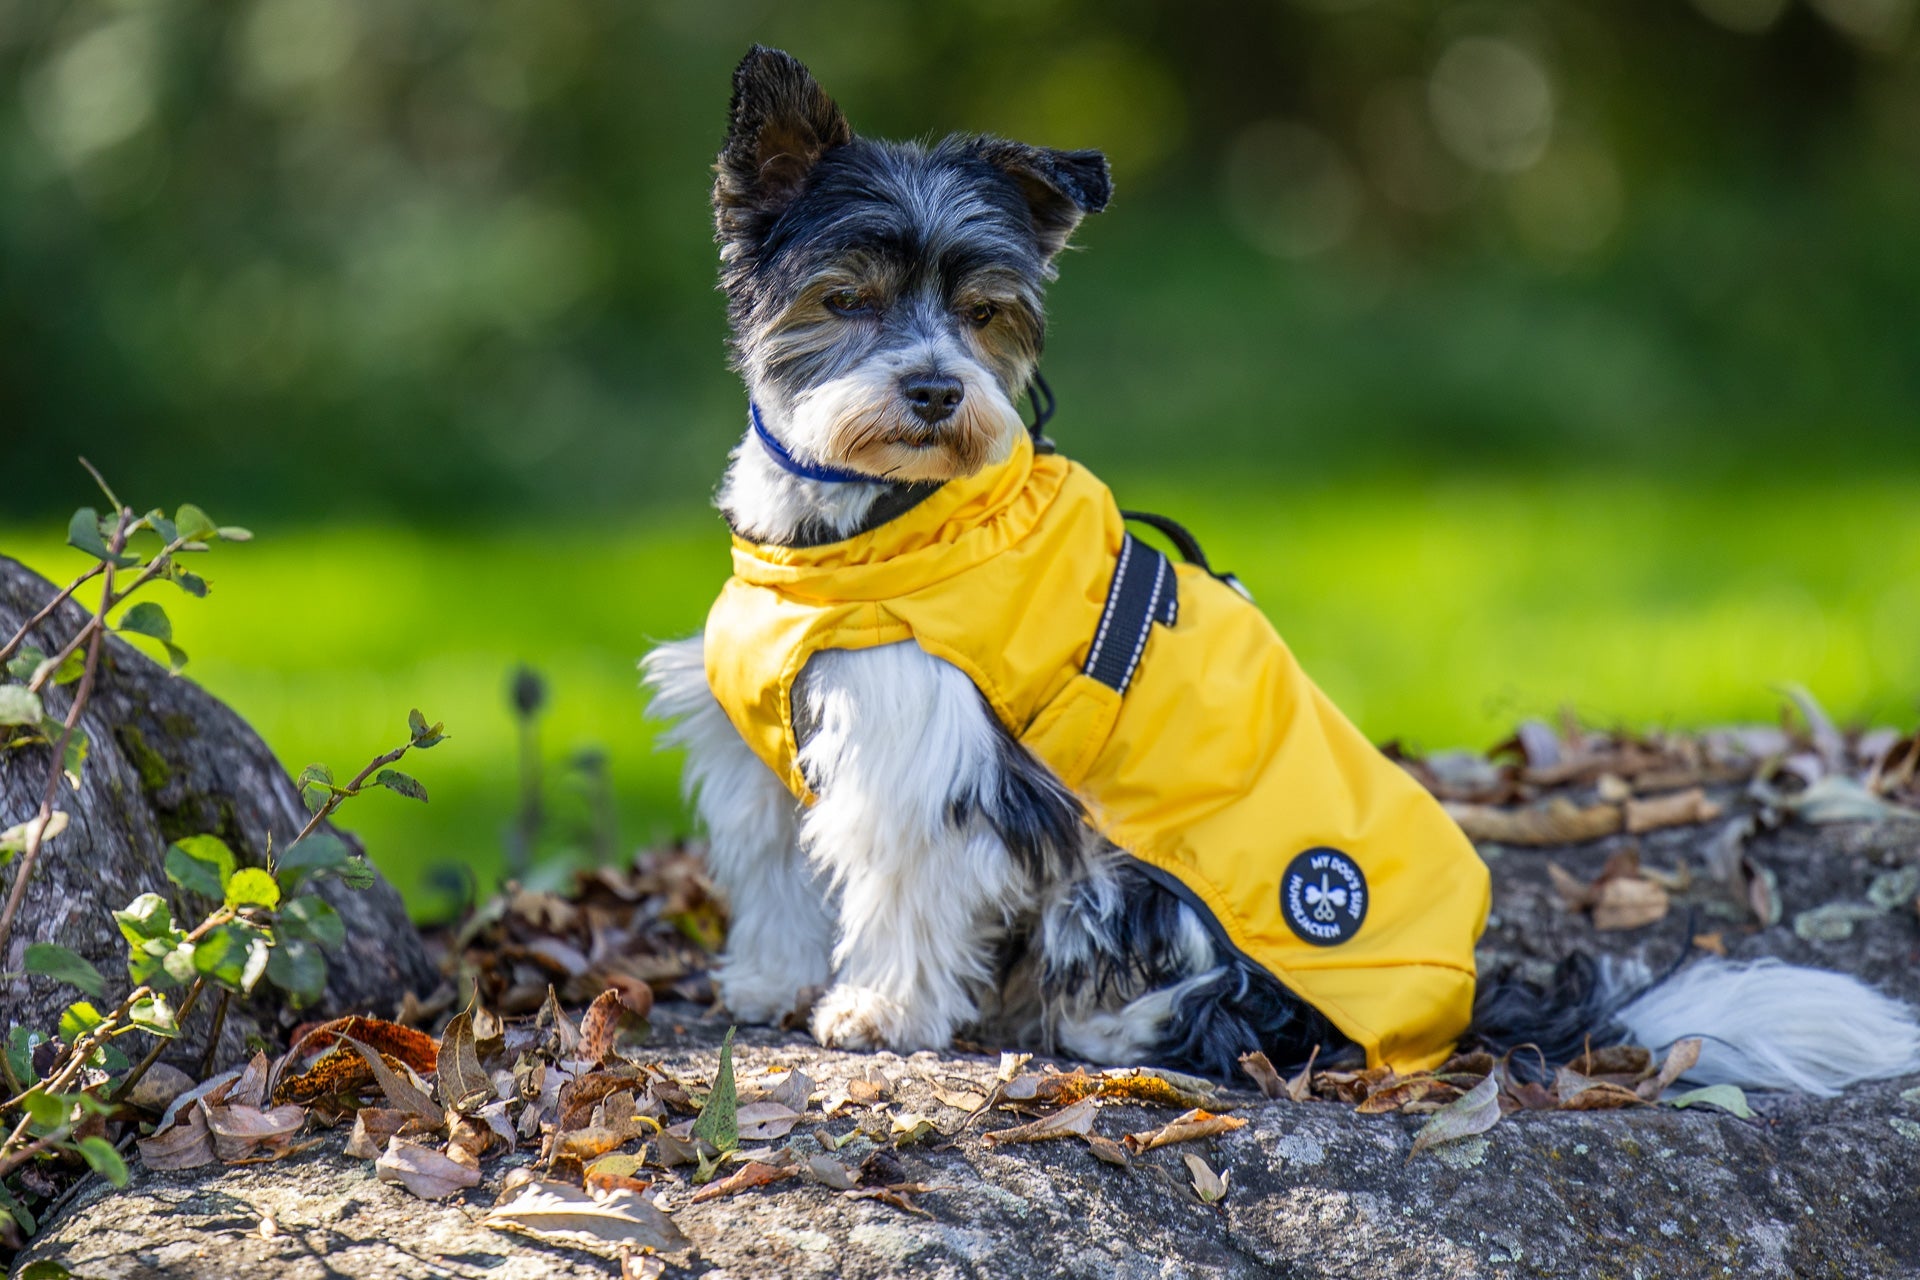 My dog's suit - Premium dog jackets - made in Germany!